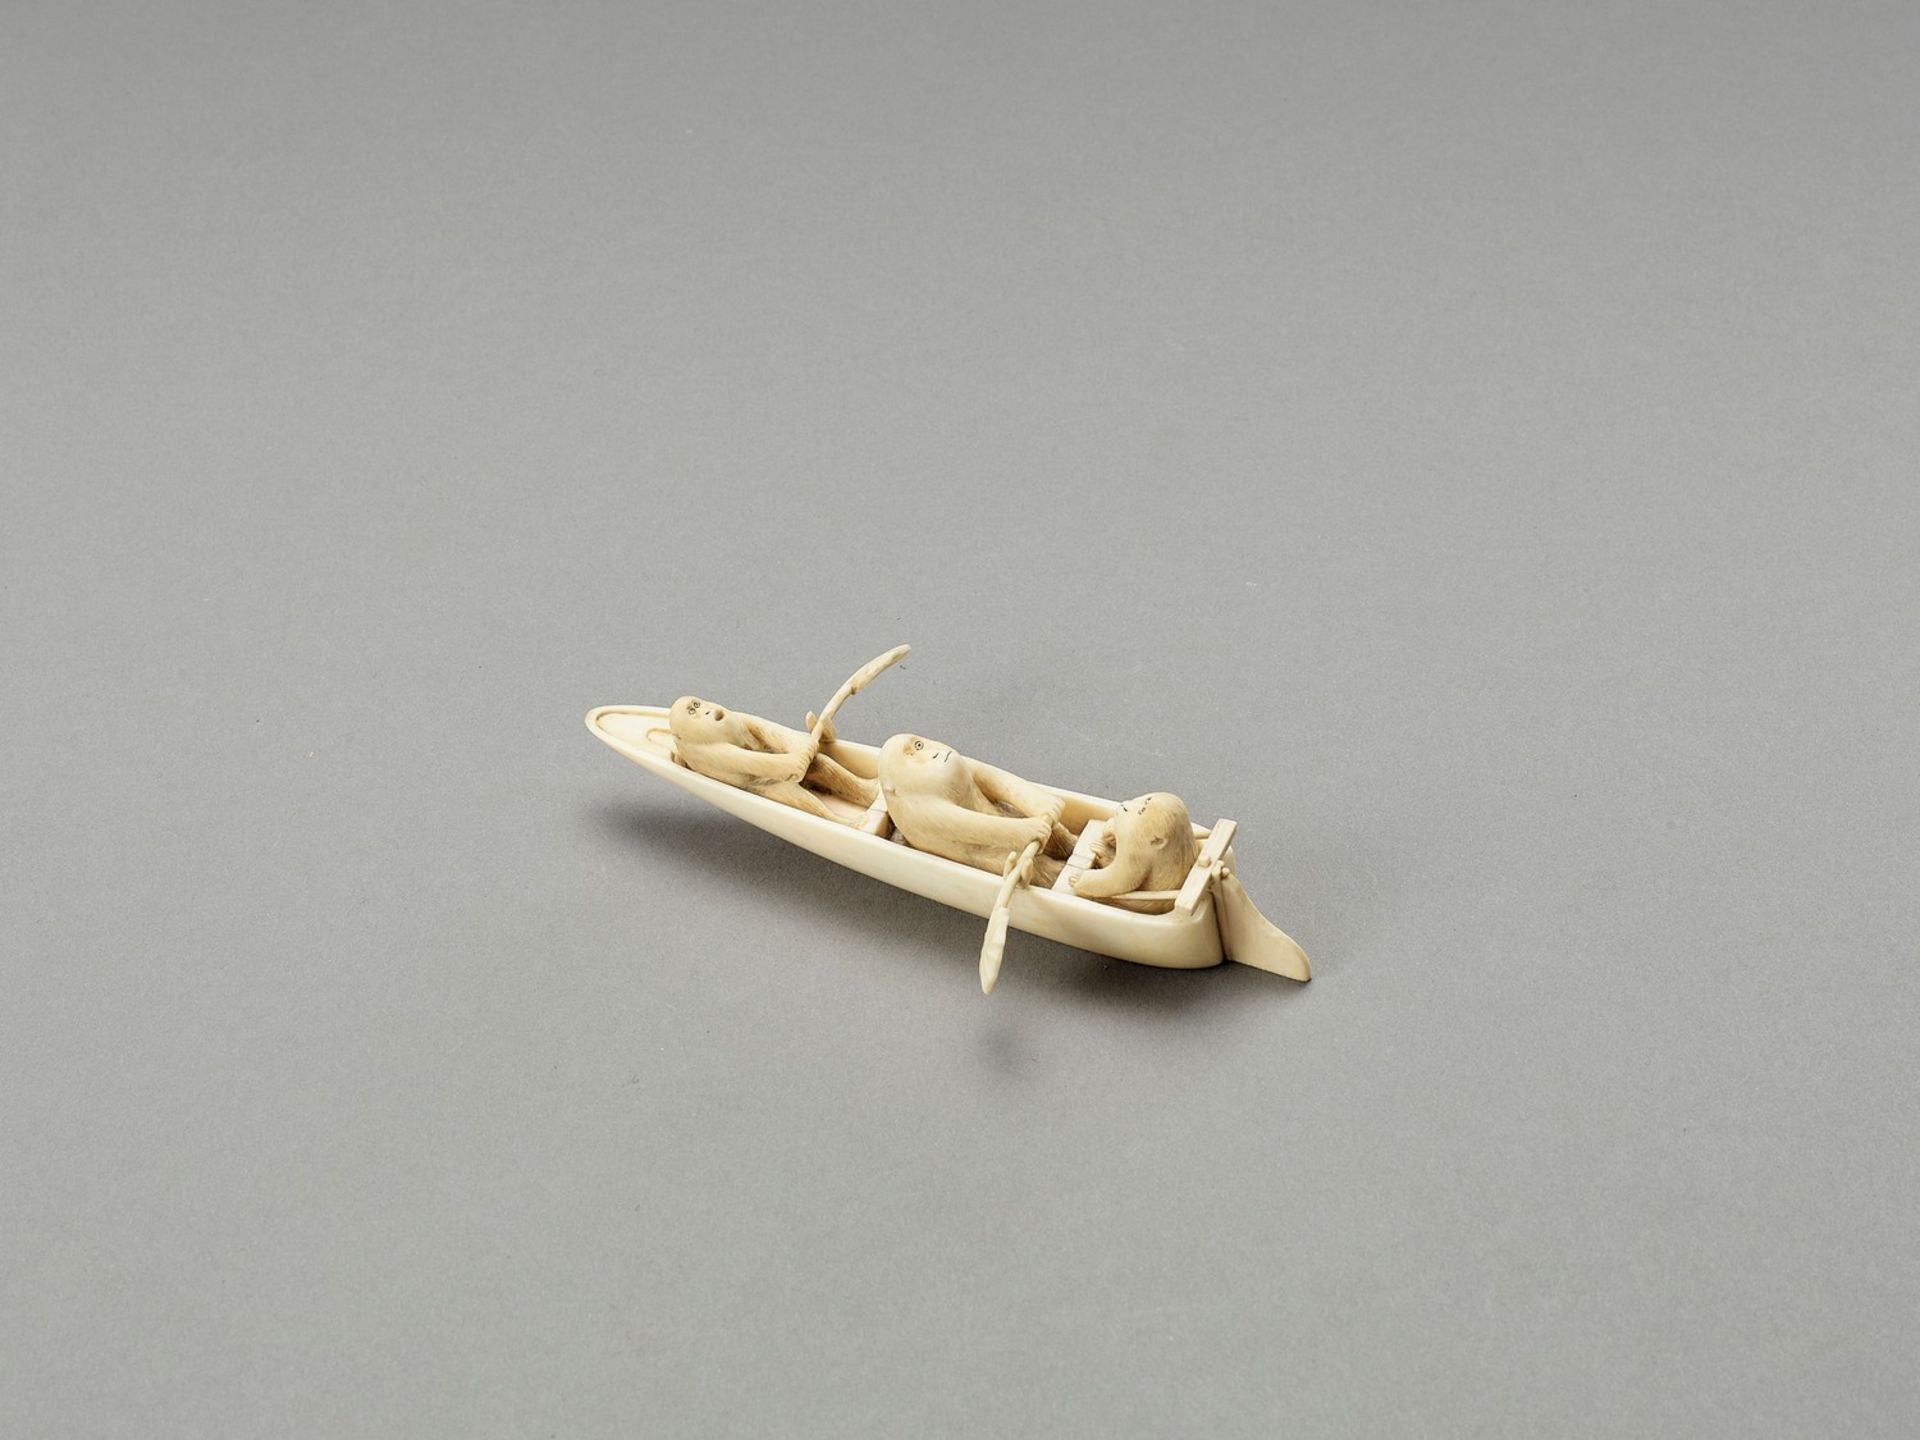 AN AMUSING IVORY OKIMONO OF MONKEYS IN A BOAT - Image 2 of 3